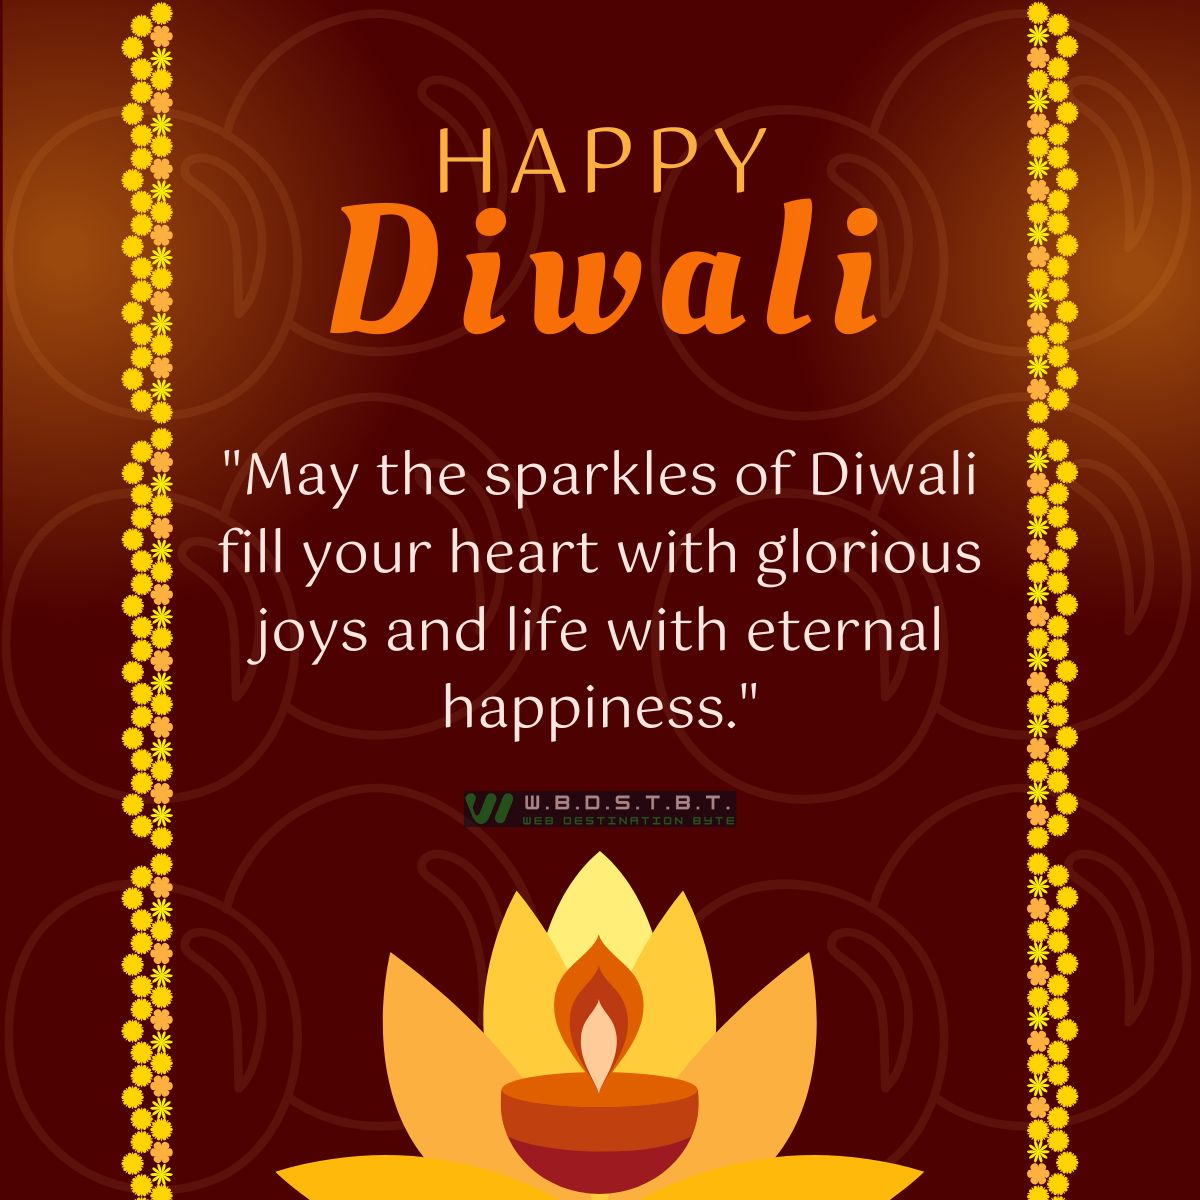 "May the sparkles of Diwali fill your heart with glorious joys and life with eternal happiness."